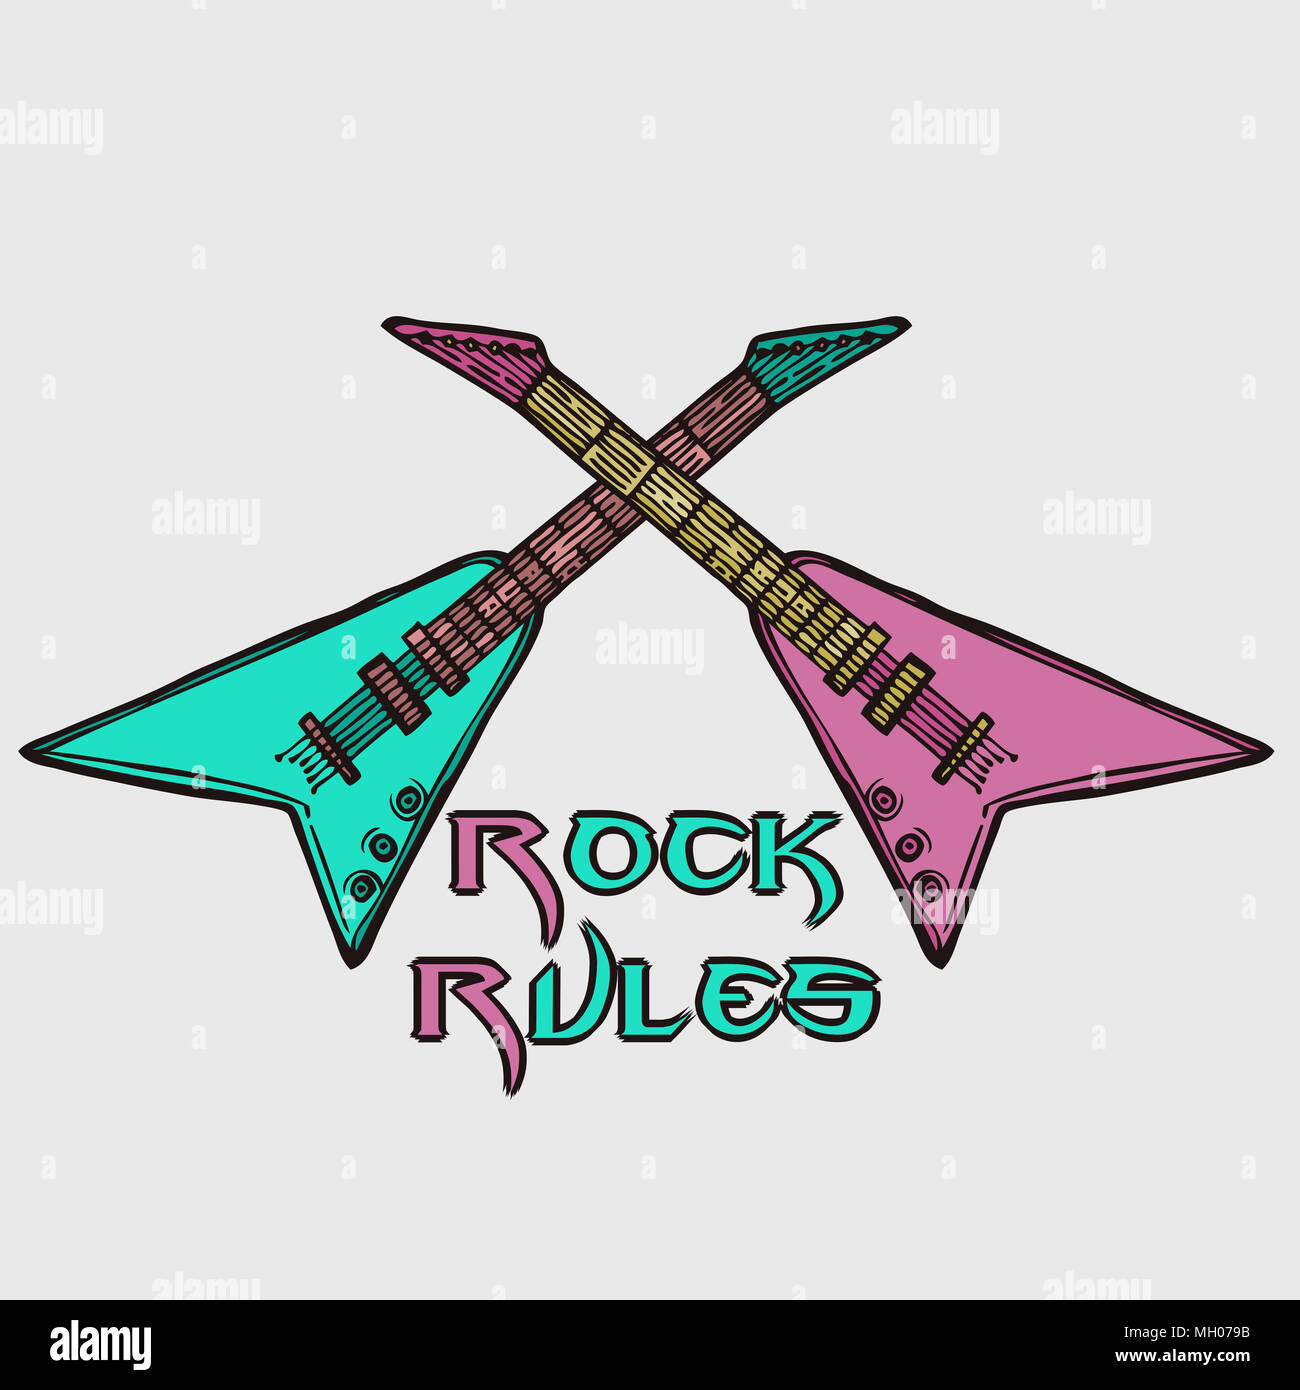 Rock Rulesl sign poster. Illustration with two electric guitars as metal music symbol. Stock Photo